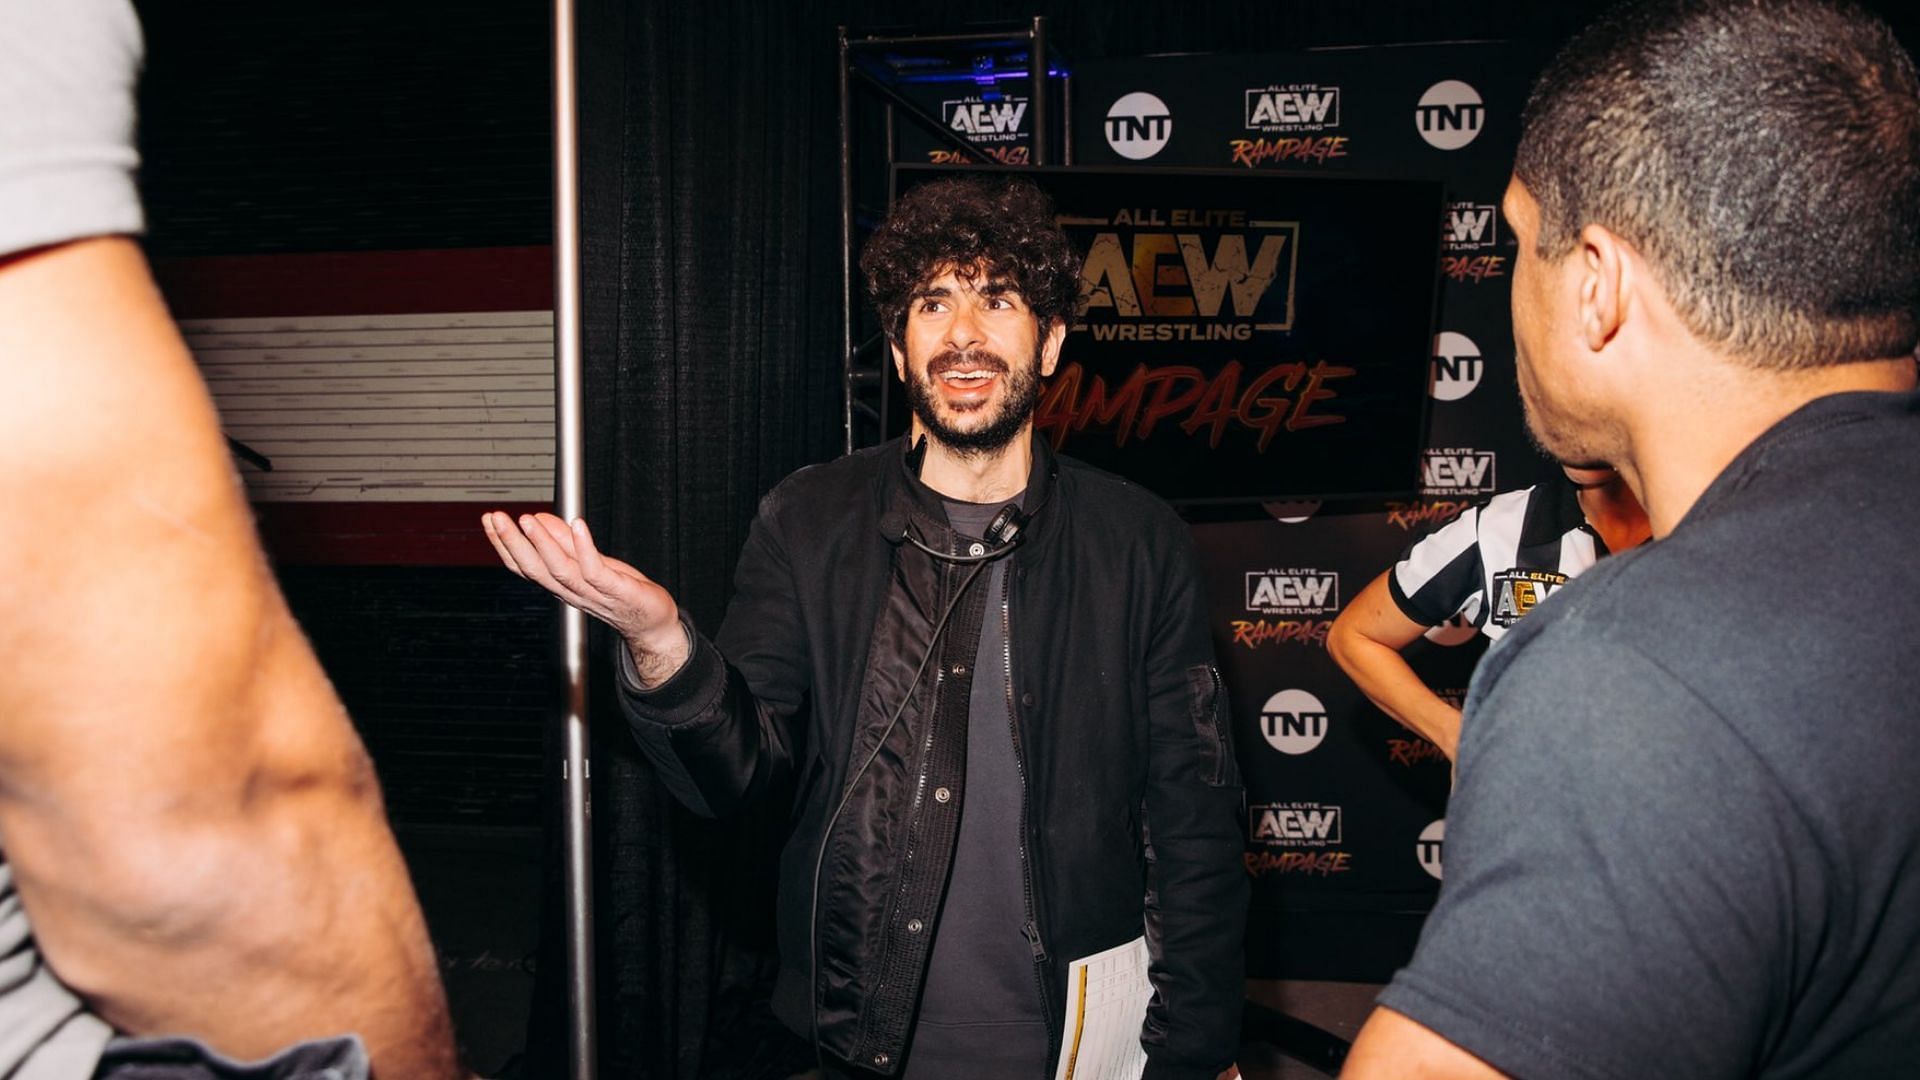 Tony Khan backstage at an AEW event in 2022